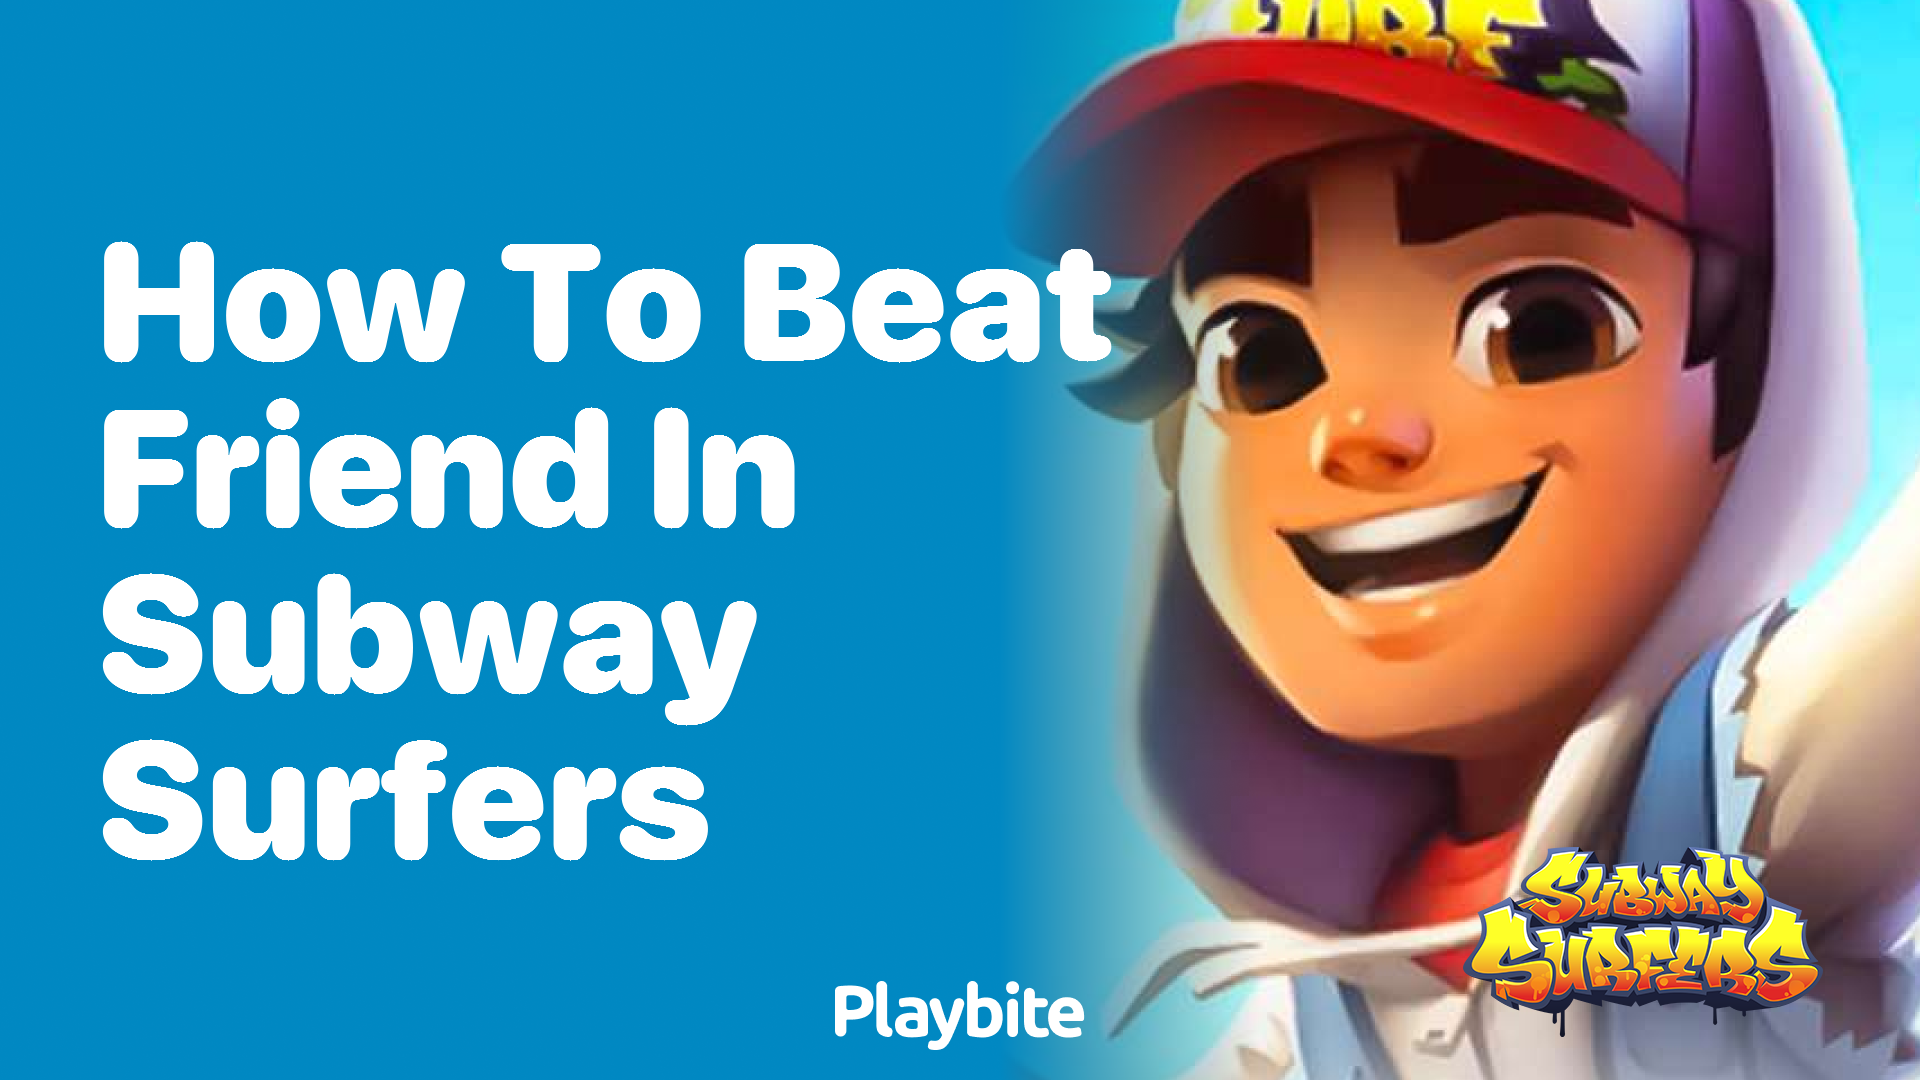 How to Beat Your Friend in Subway Surfers